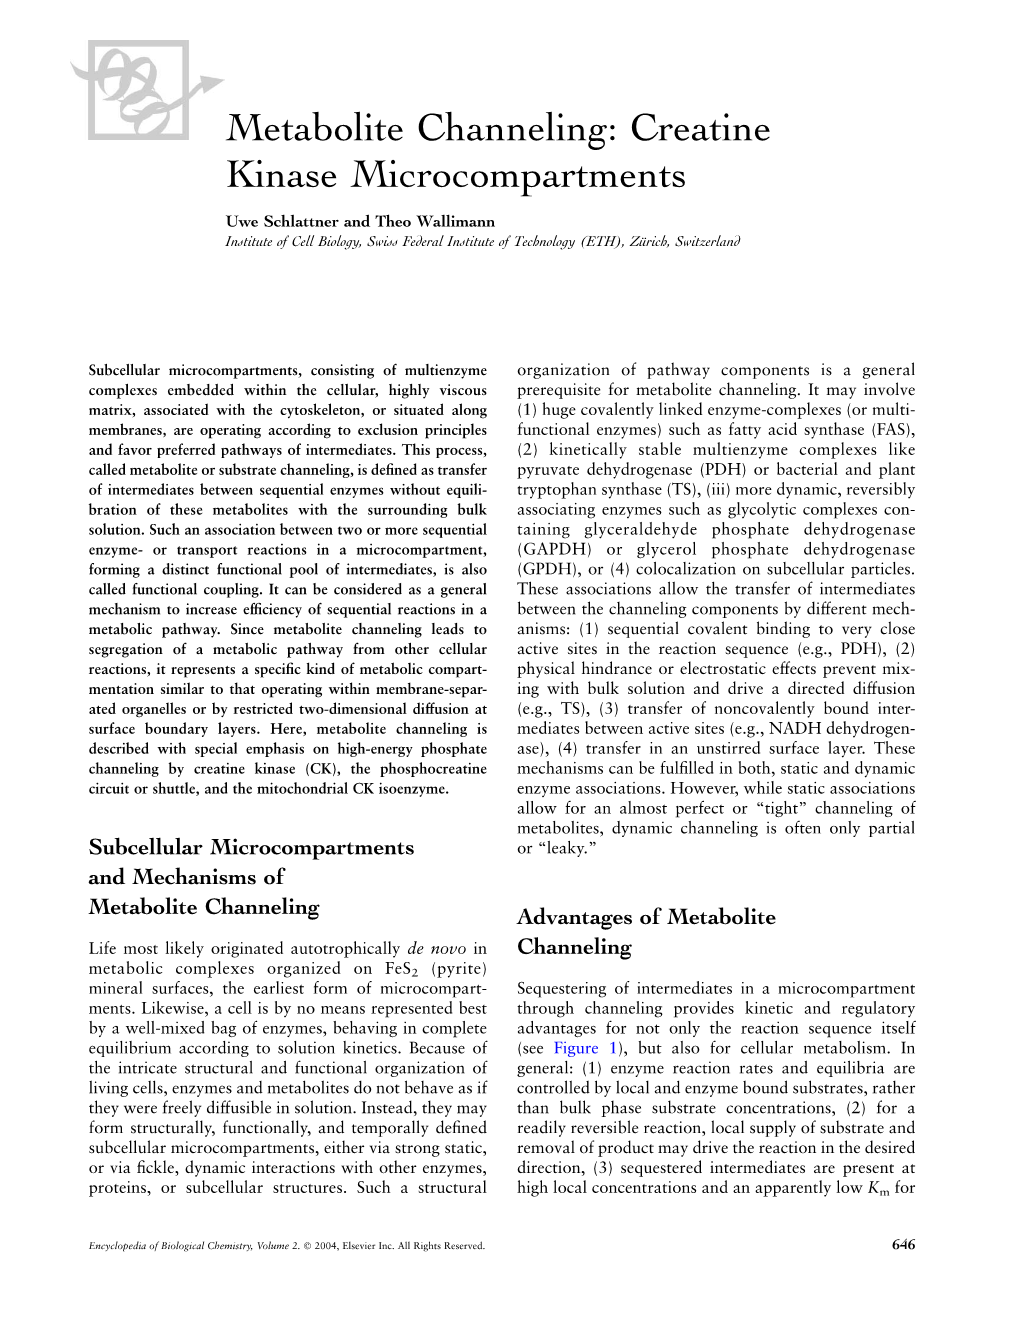 Metabolite Channeling: Creatine Kinase Microcompartments